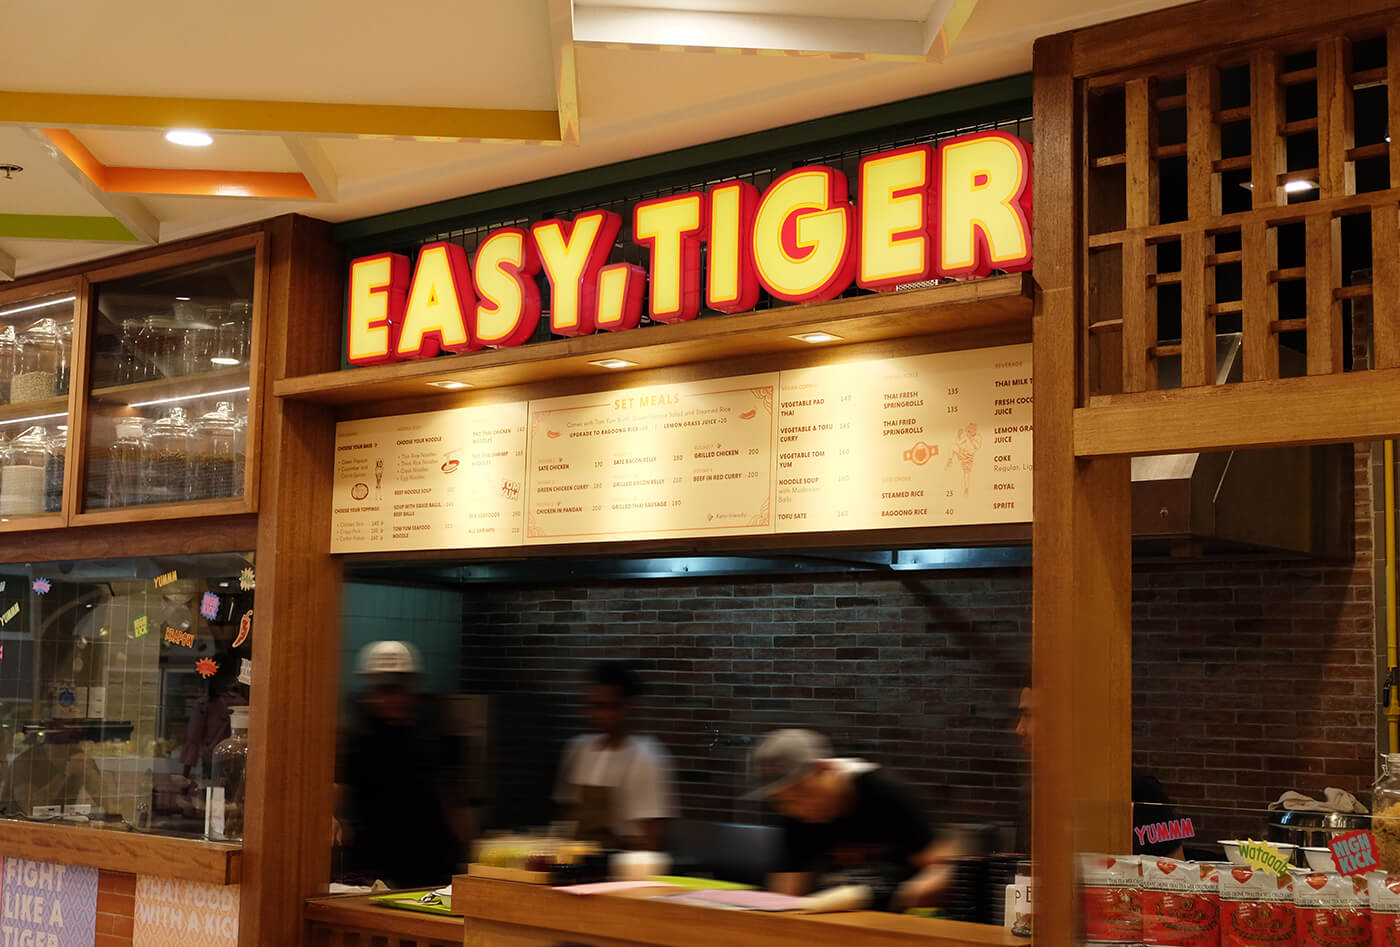 Restaurant store front design for Thai food and beverage brand Easy Tiger